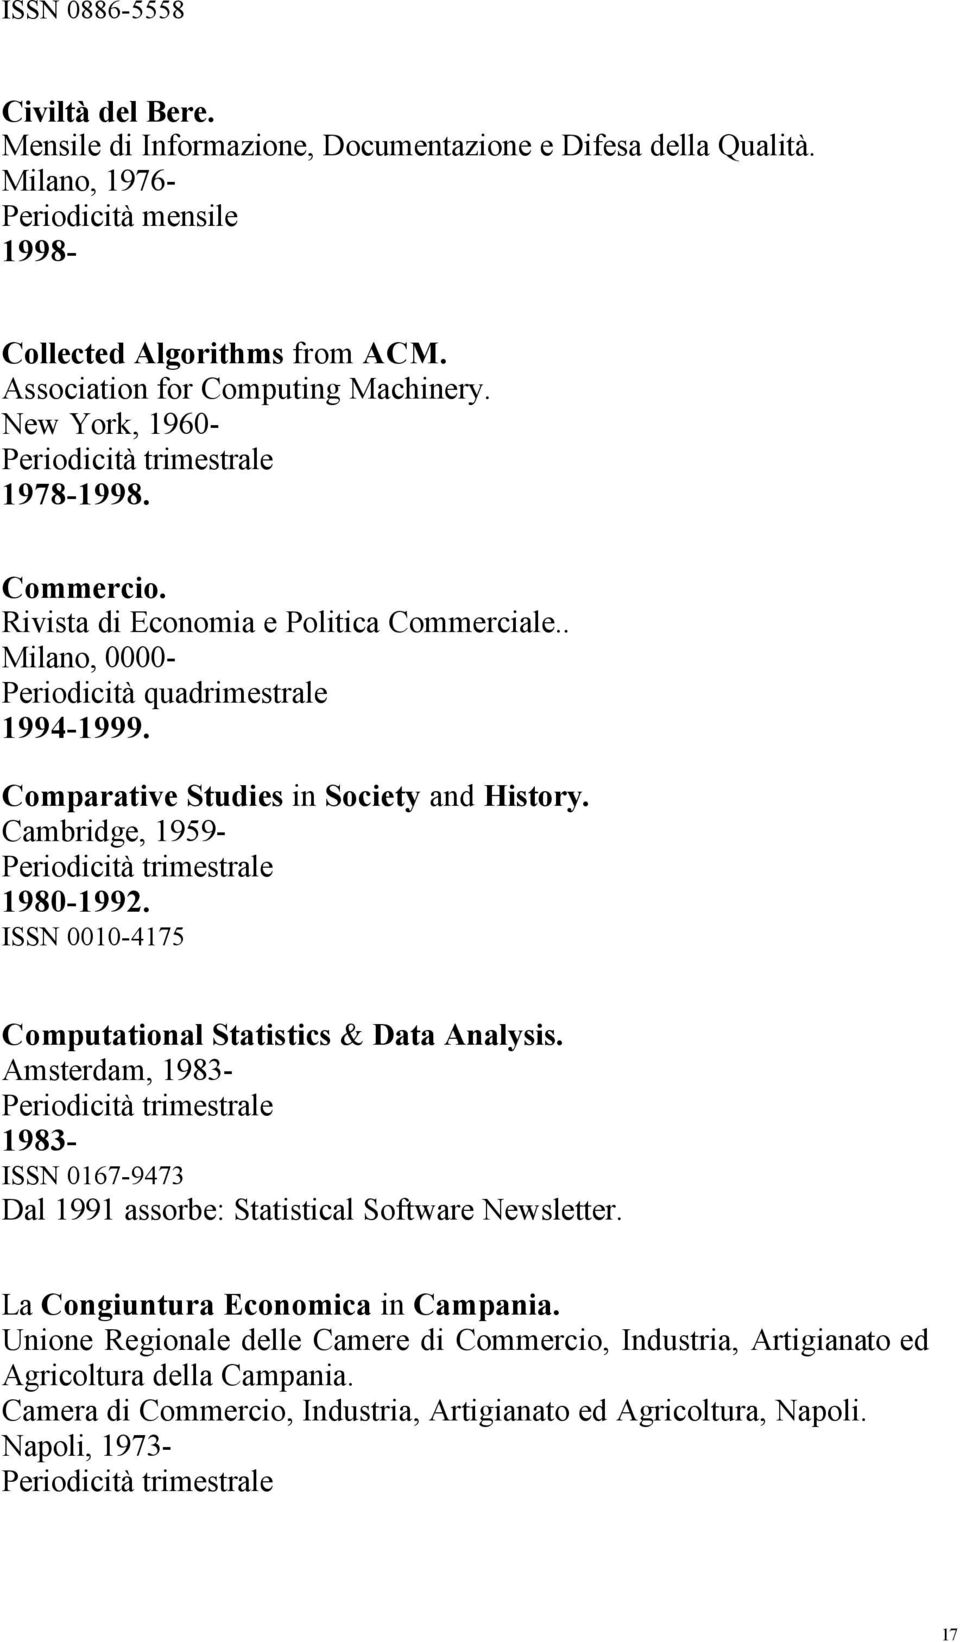 Comparative Studies in Society and History. Cambridge, 1959-1980-1992. ISSN 0010-4175 Computational Statistics & Data Analysis.